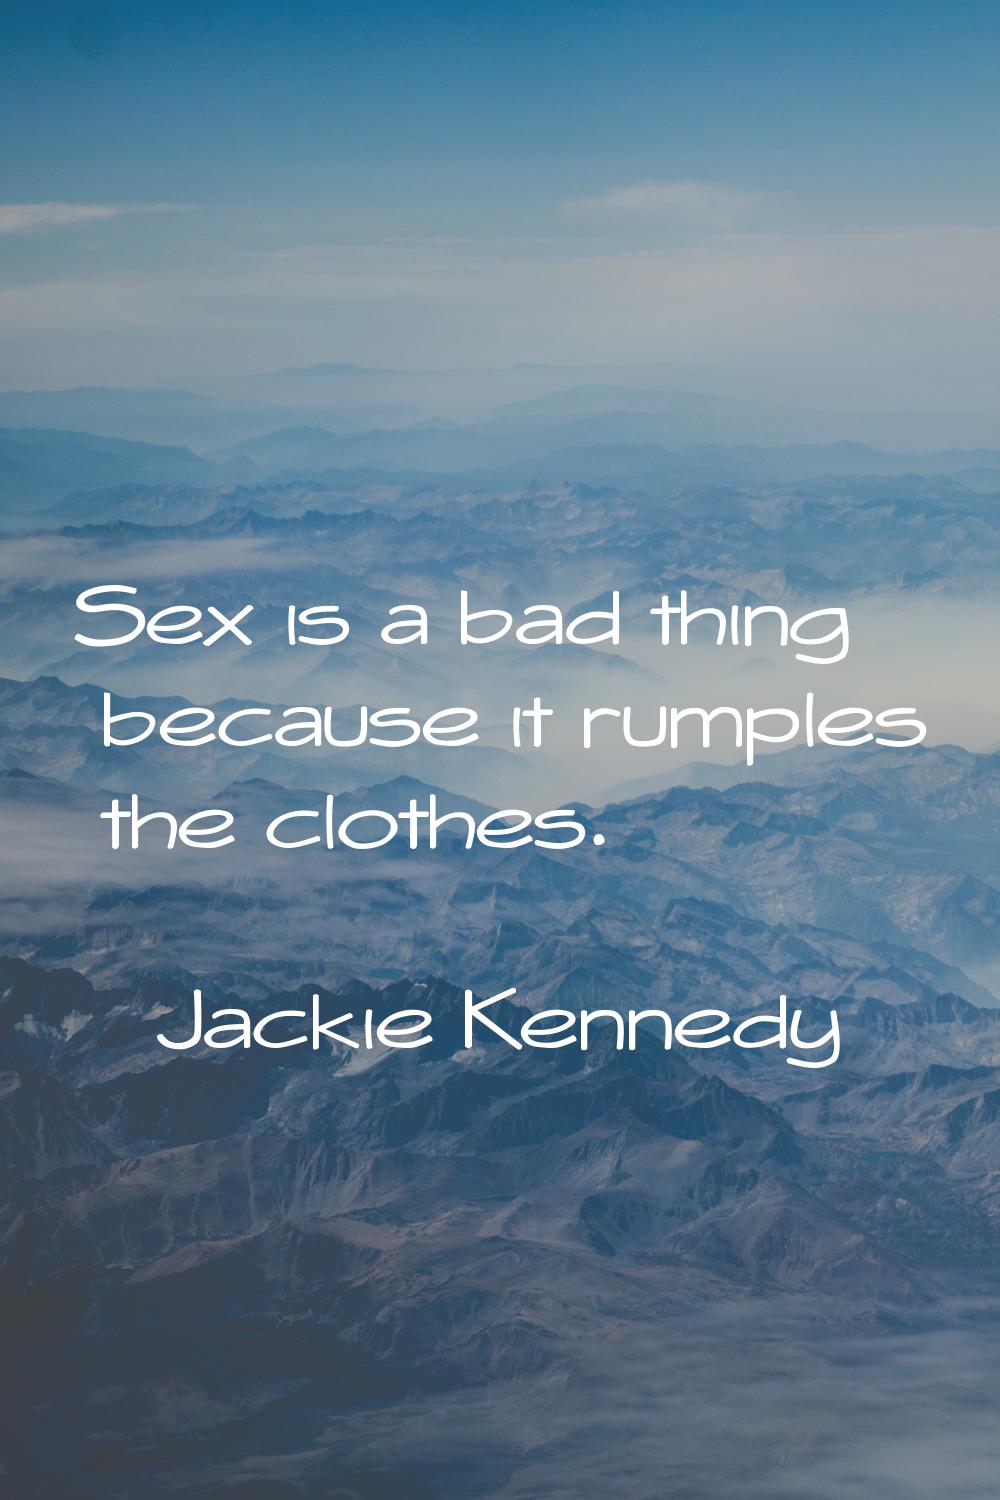 Sex is a bad thing because it rumples the clothes.